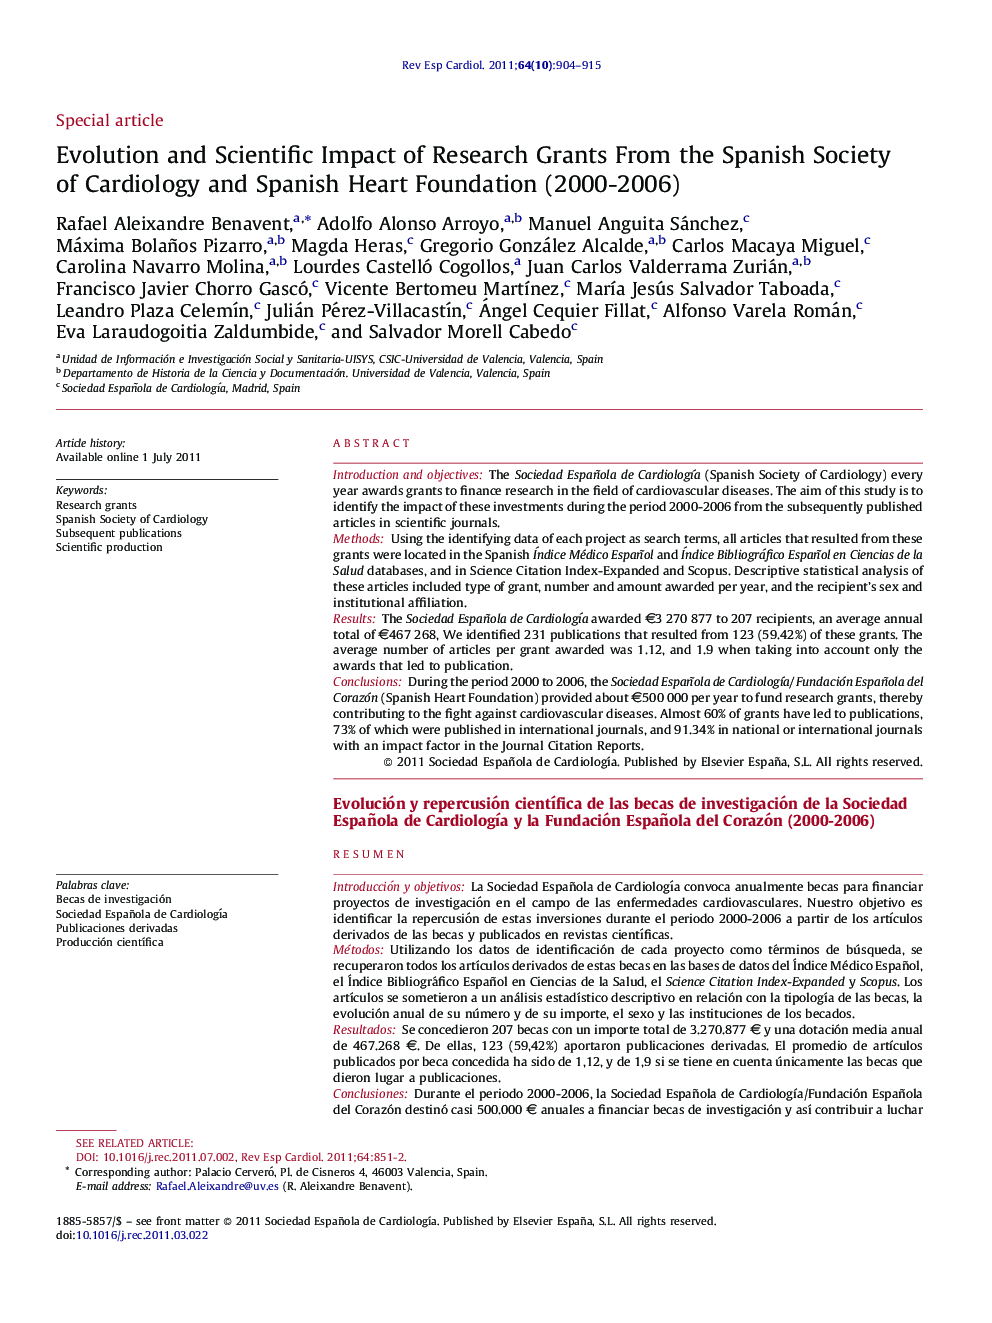 Evolution and Scientific Impact of Research Grants From the Spanish Society of Cardiology and Spanish Heart Foundation (2000-2006)